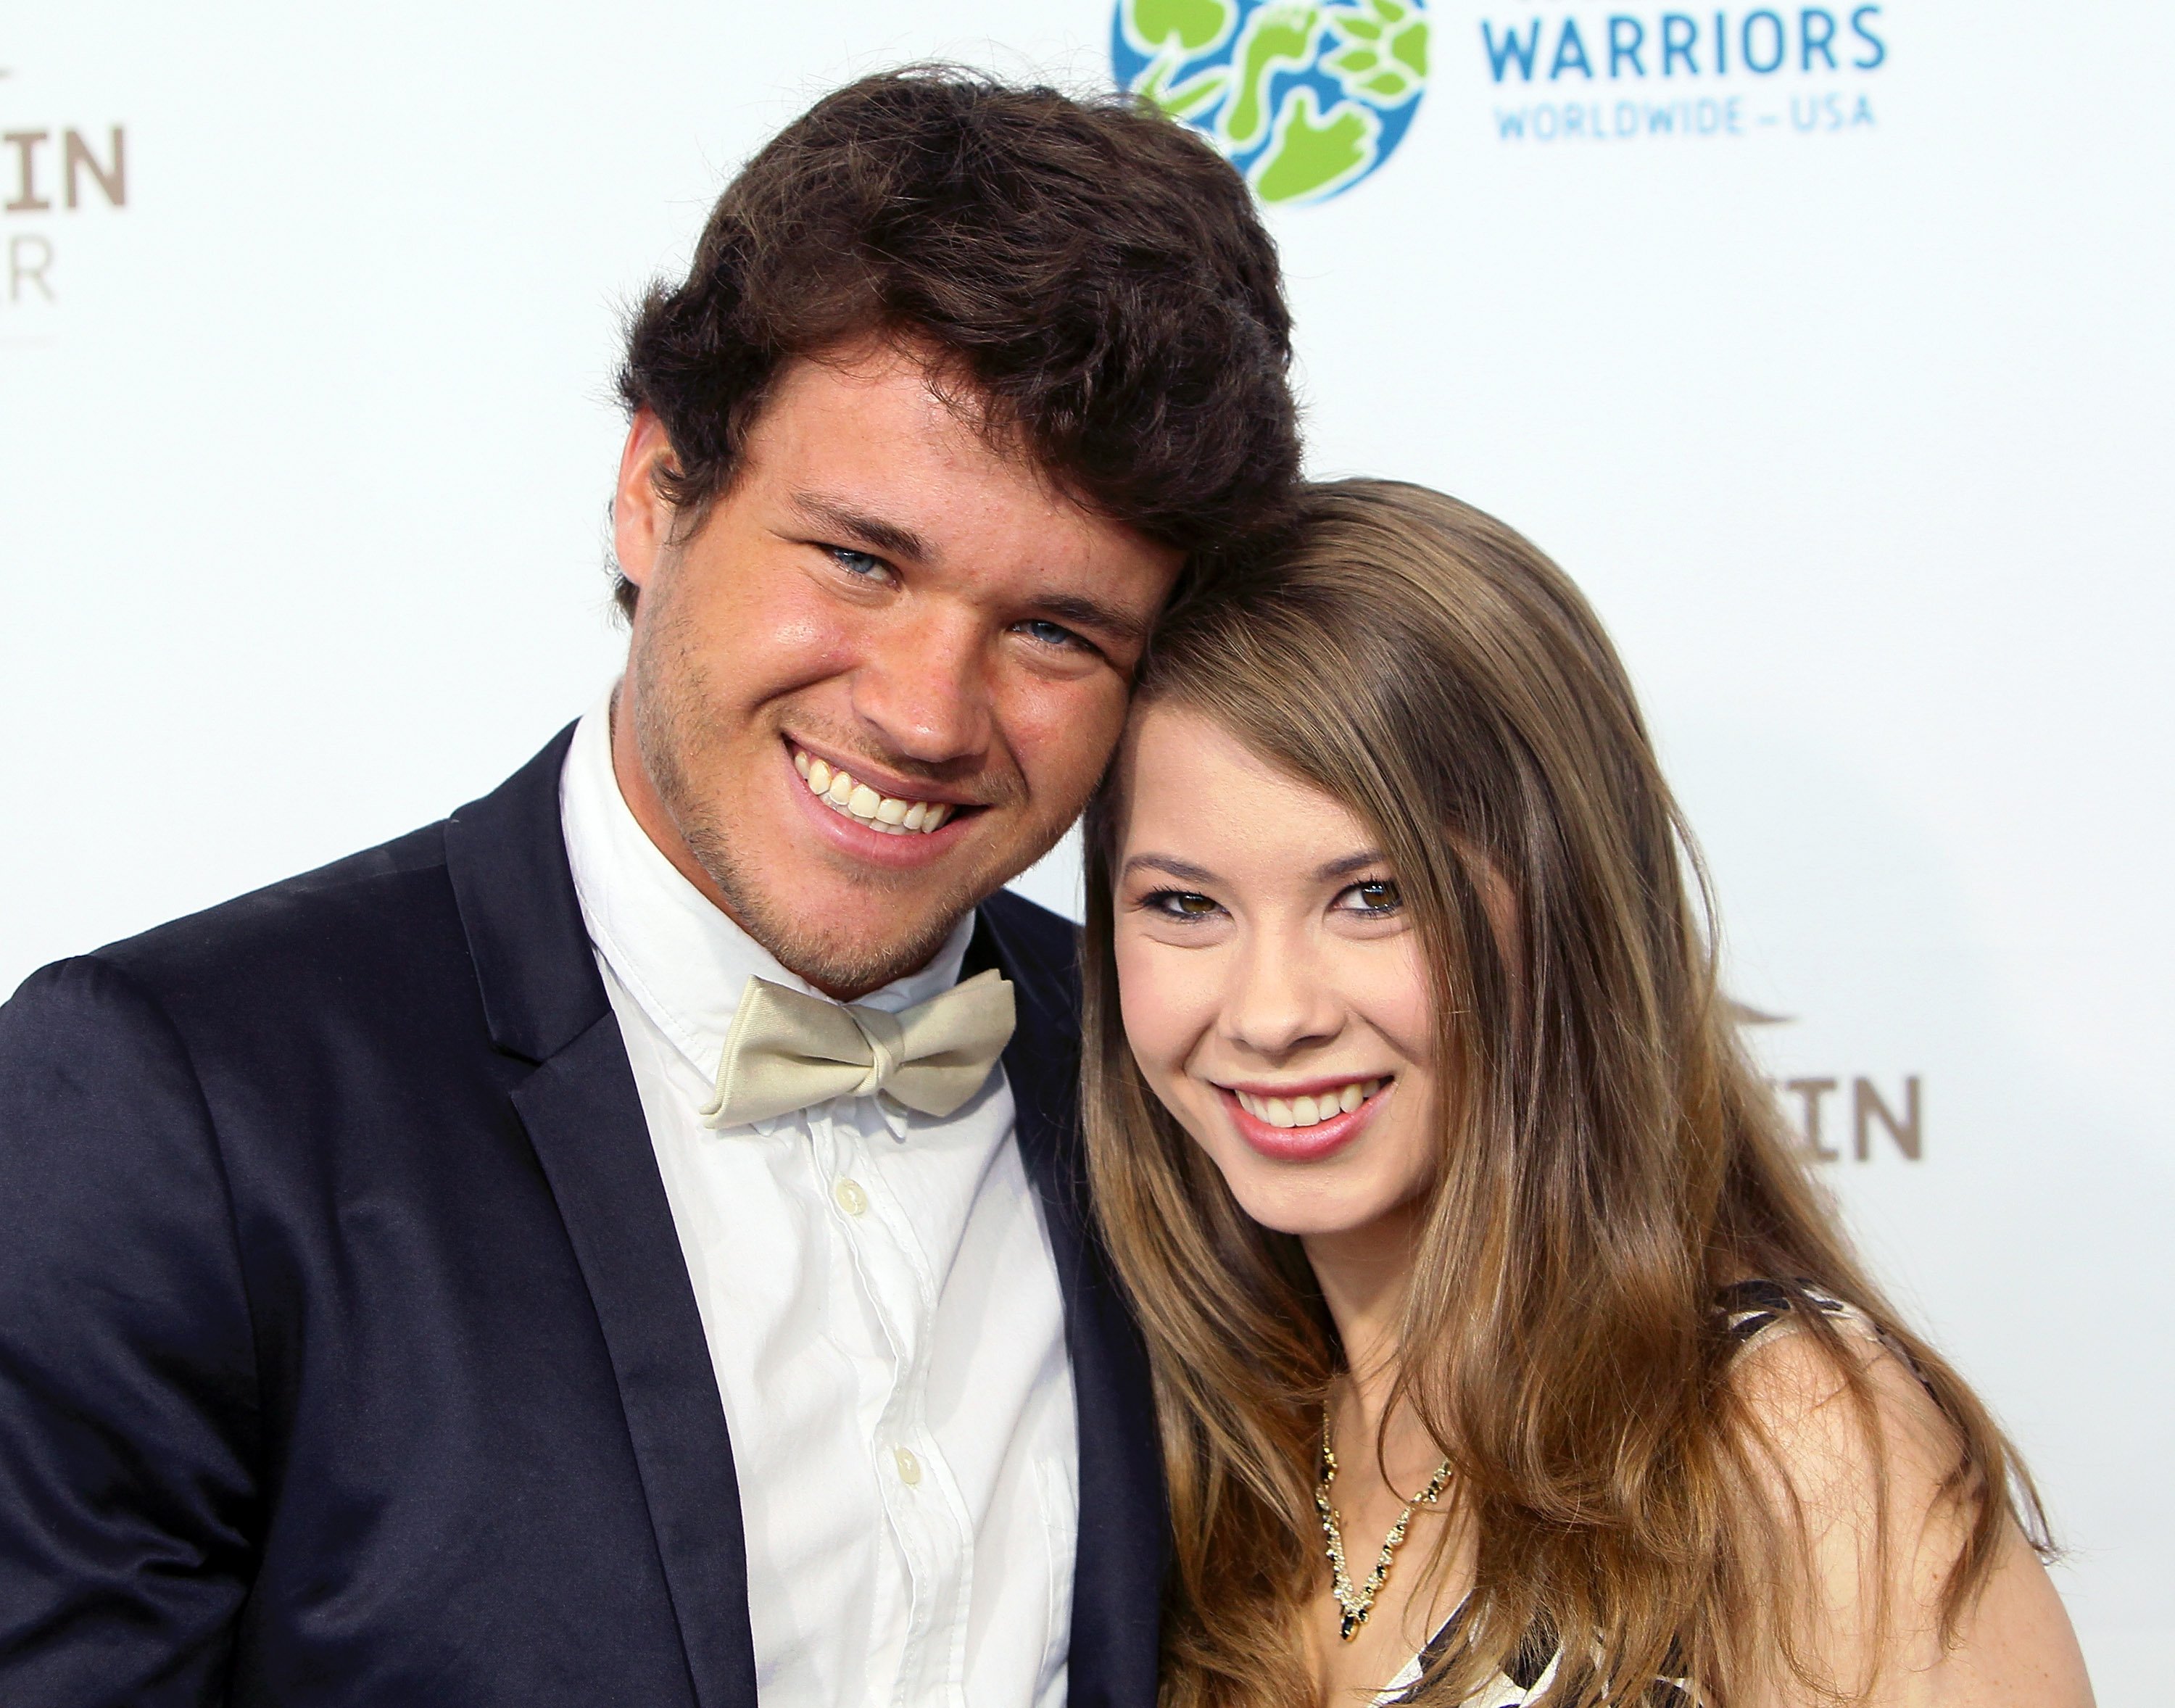 Chandler Powell and Bindi Irwin attend the Steve Irwin Gala Dinner at L.A. LIVE on May 21, 2016, in Los Angeles, California. | Source: Getty Images.